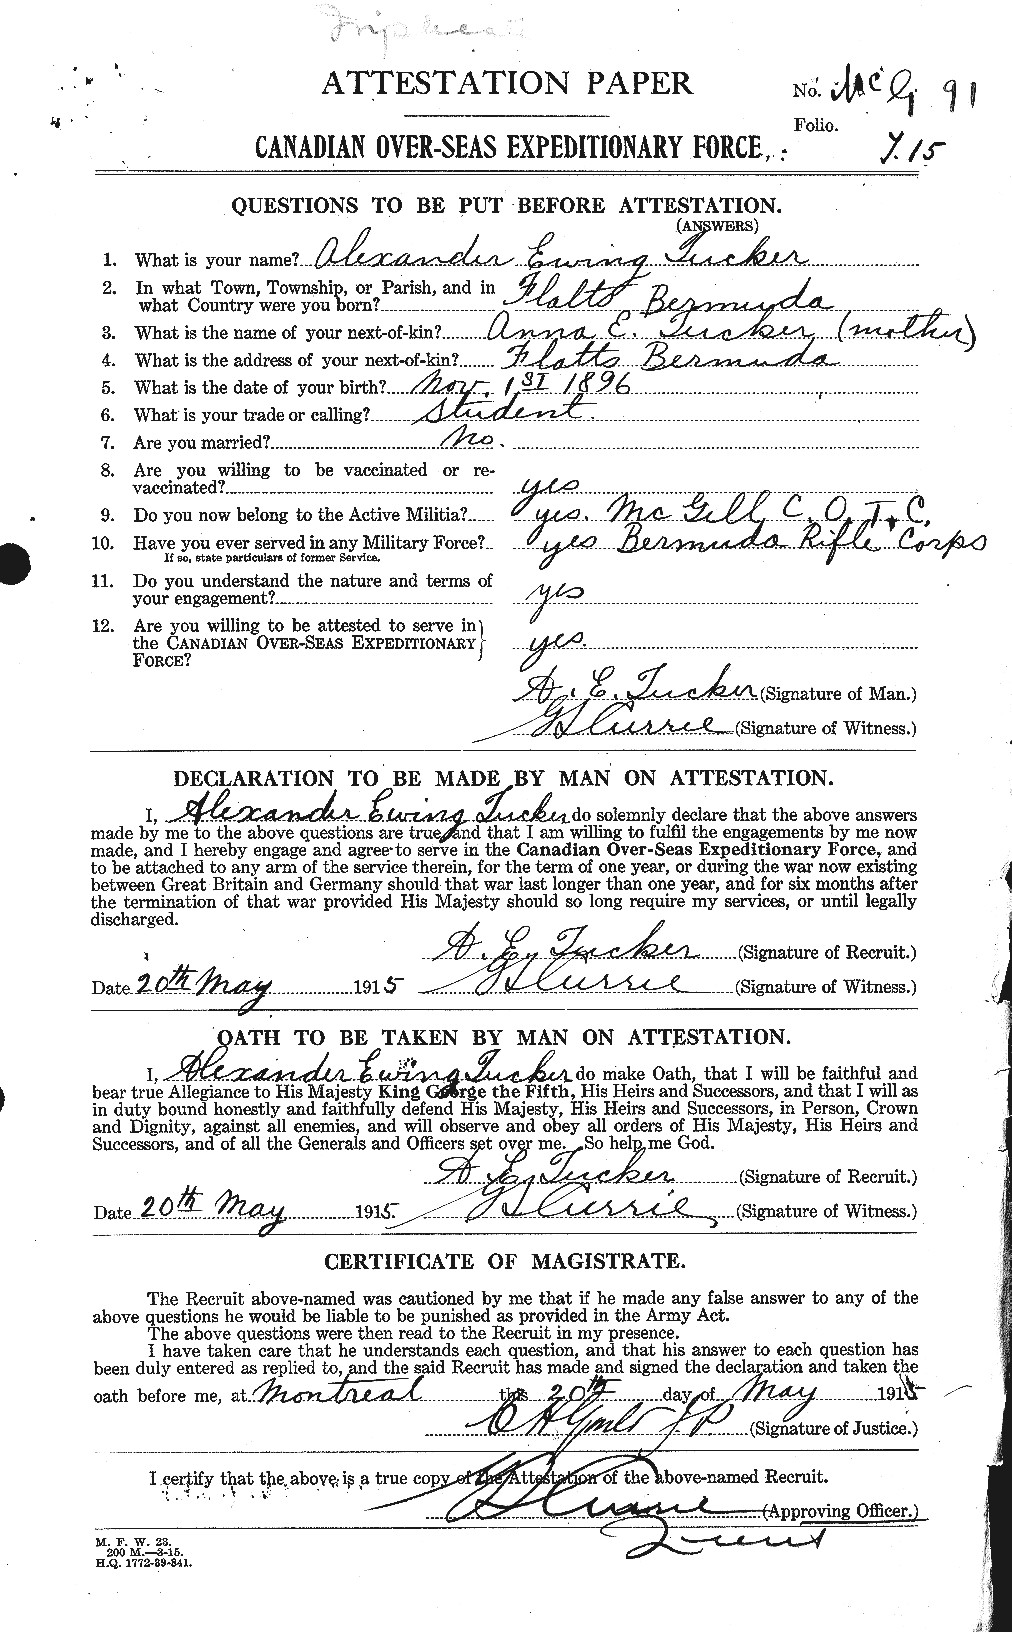 Personnel Records of the First World War - CEF 642635a